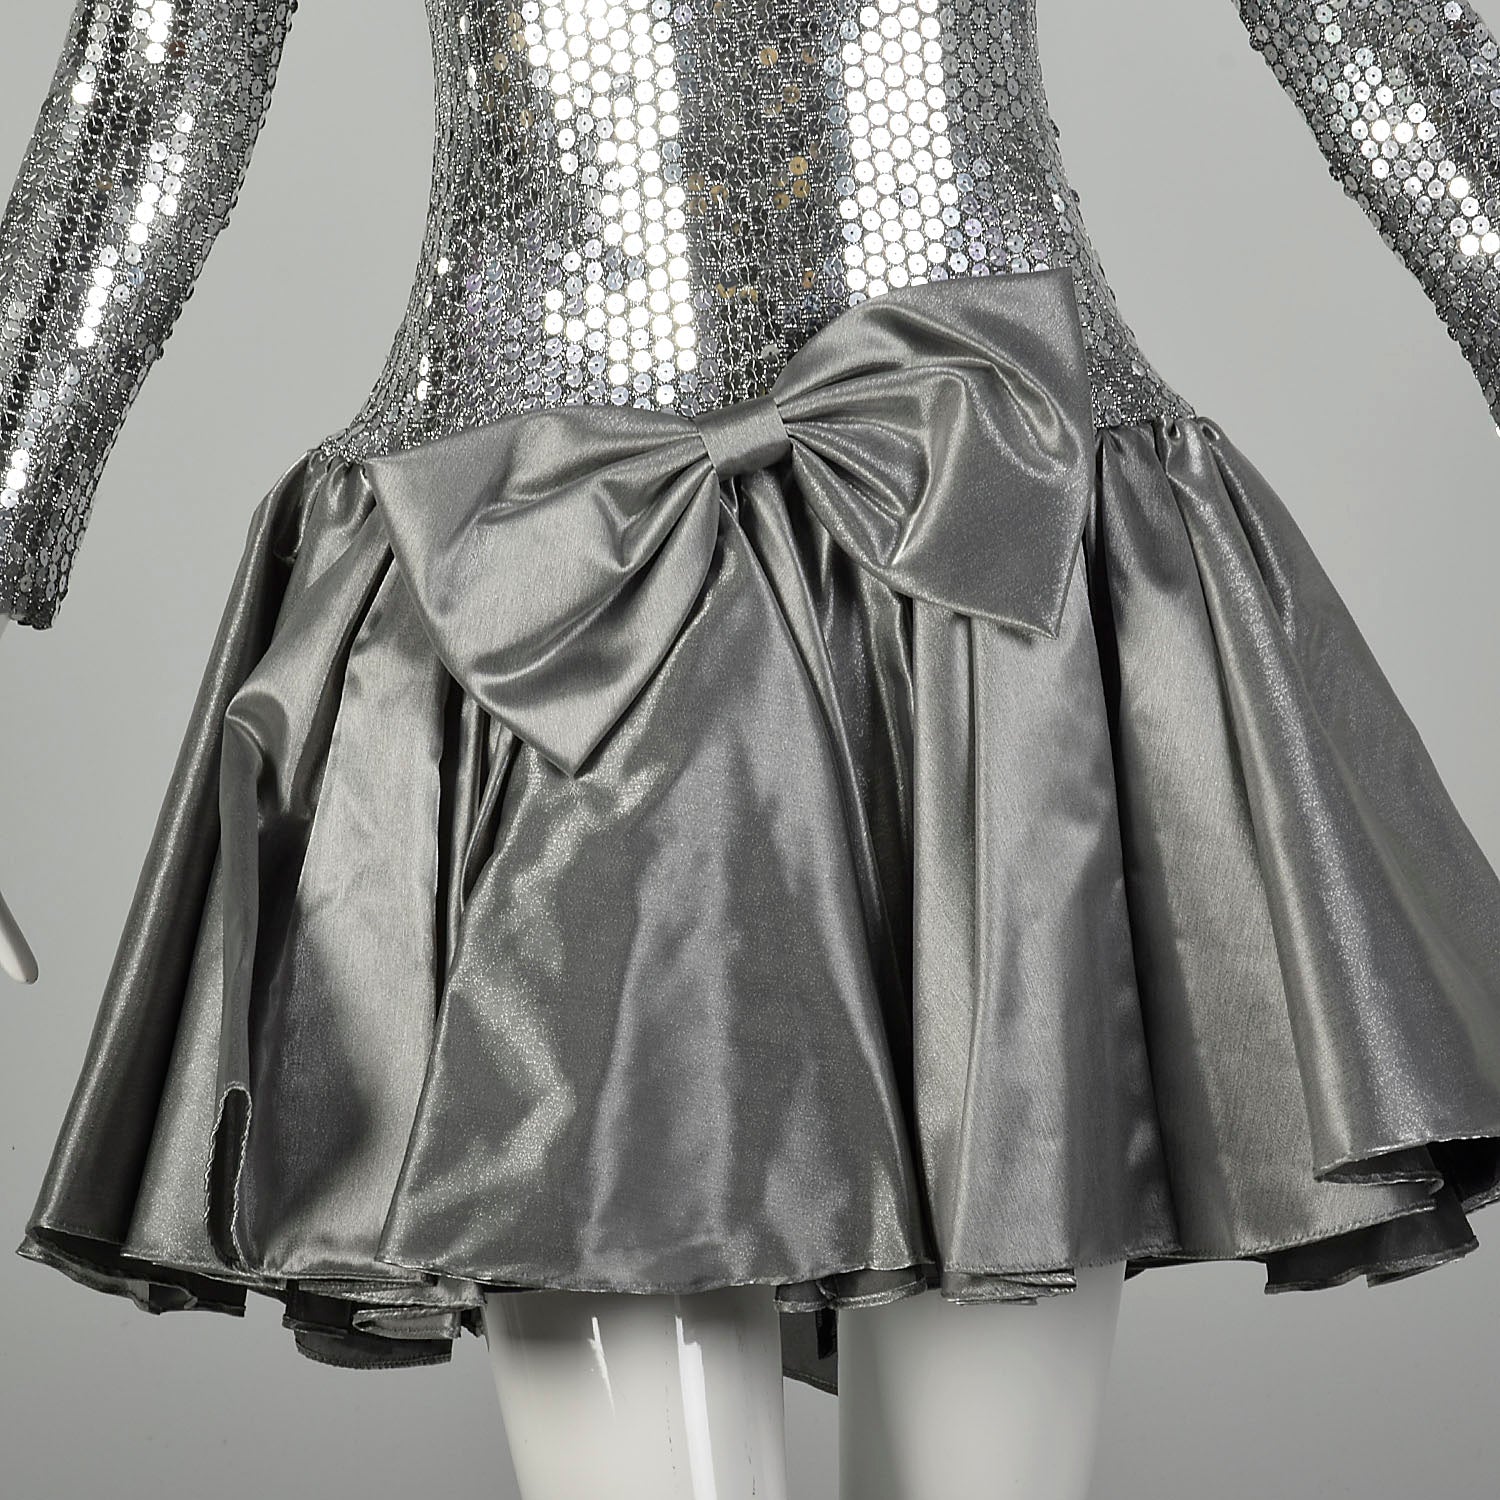 XS 1980s Silver Sequin Party Dress Bow Drop Waist Long Sleeve